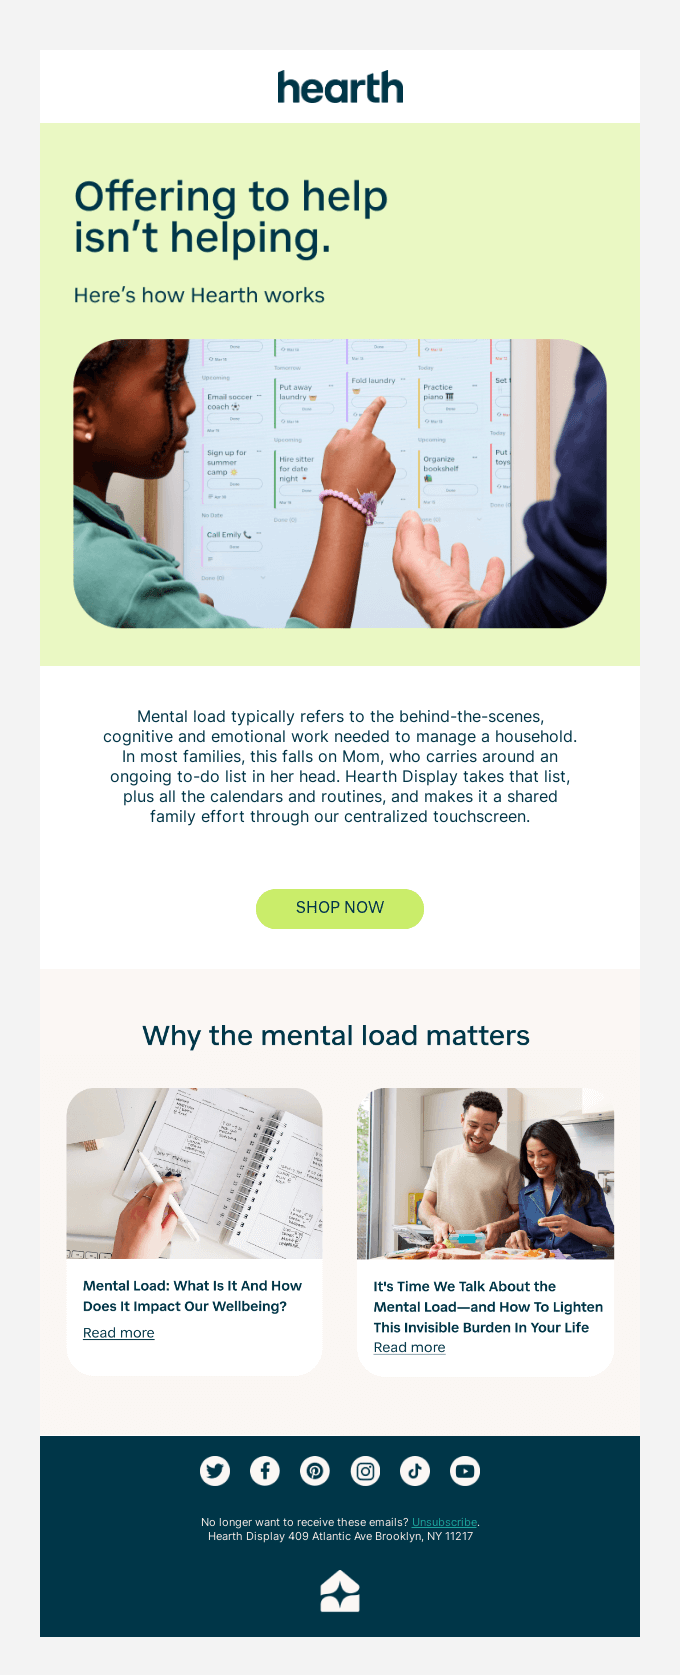 Fact: Making a list isn’t sharing the mental load